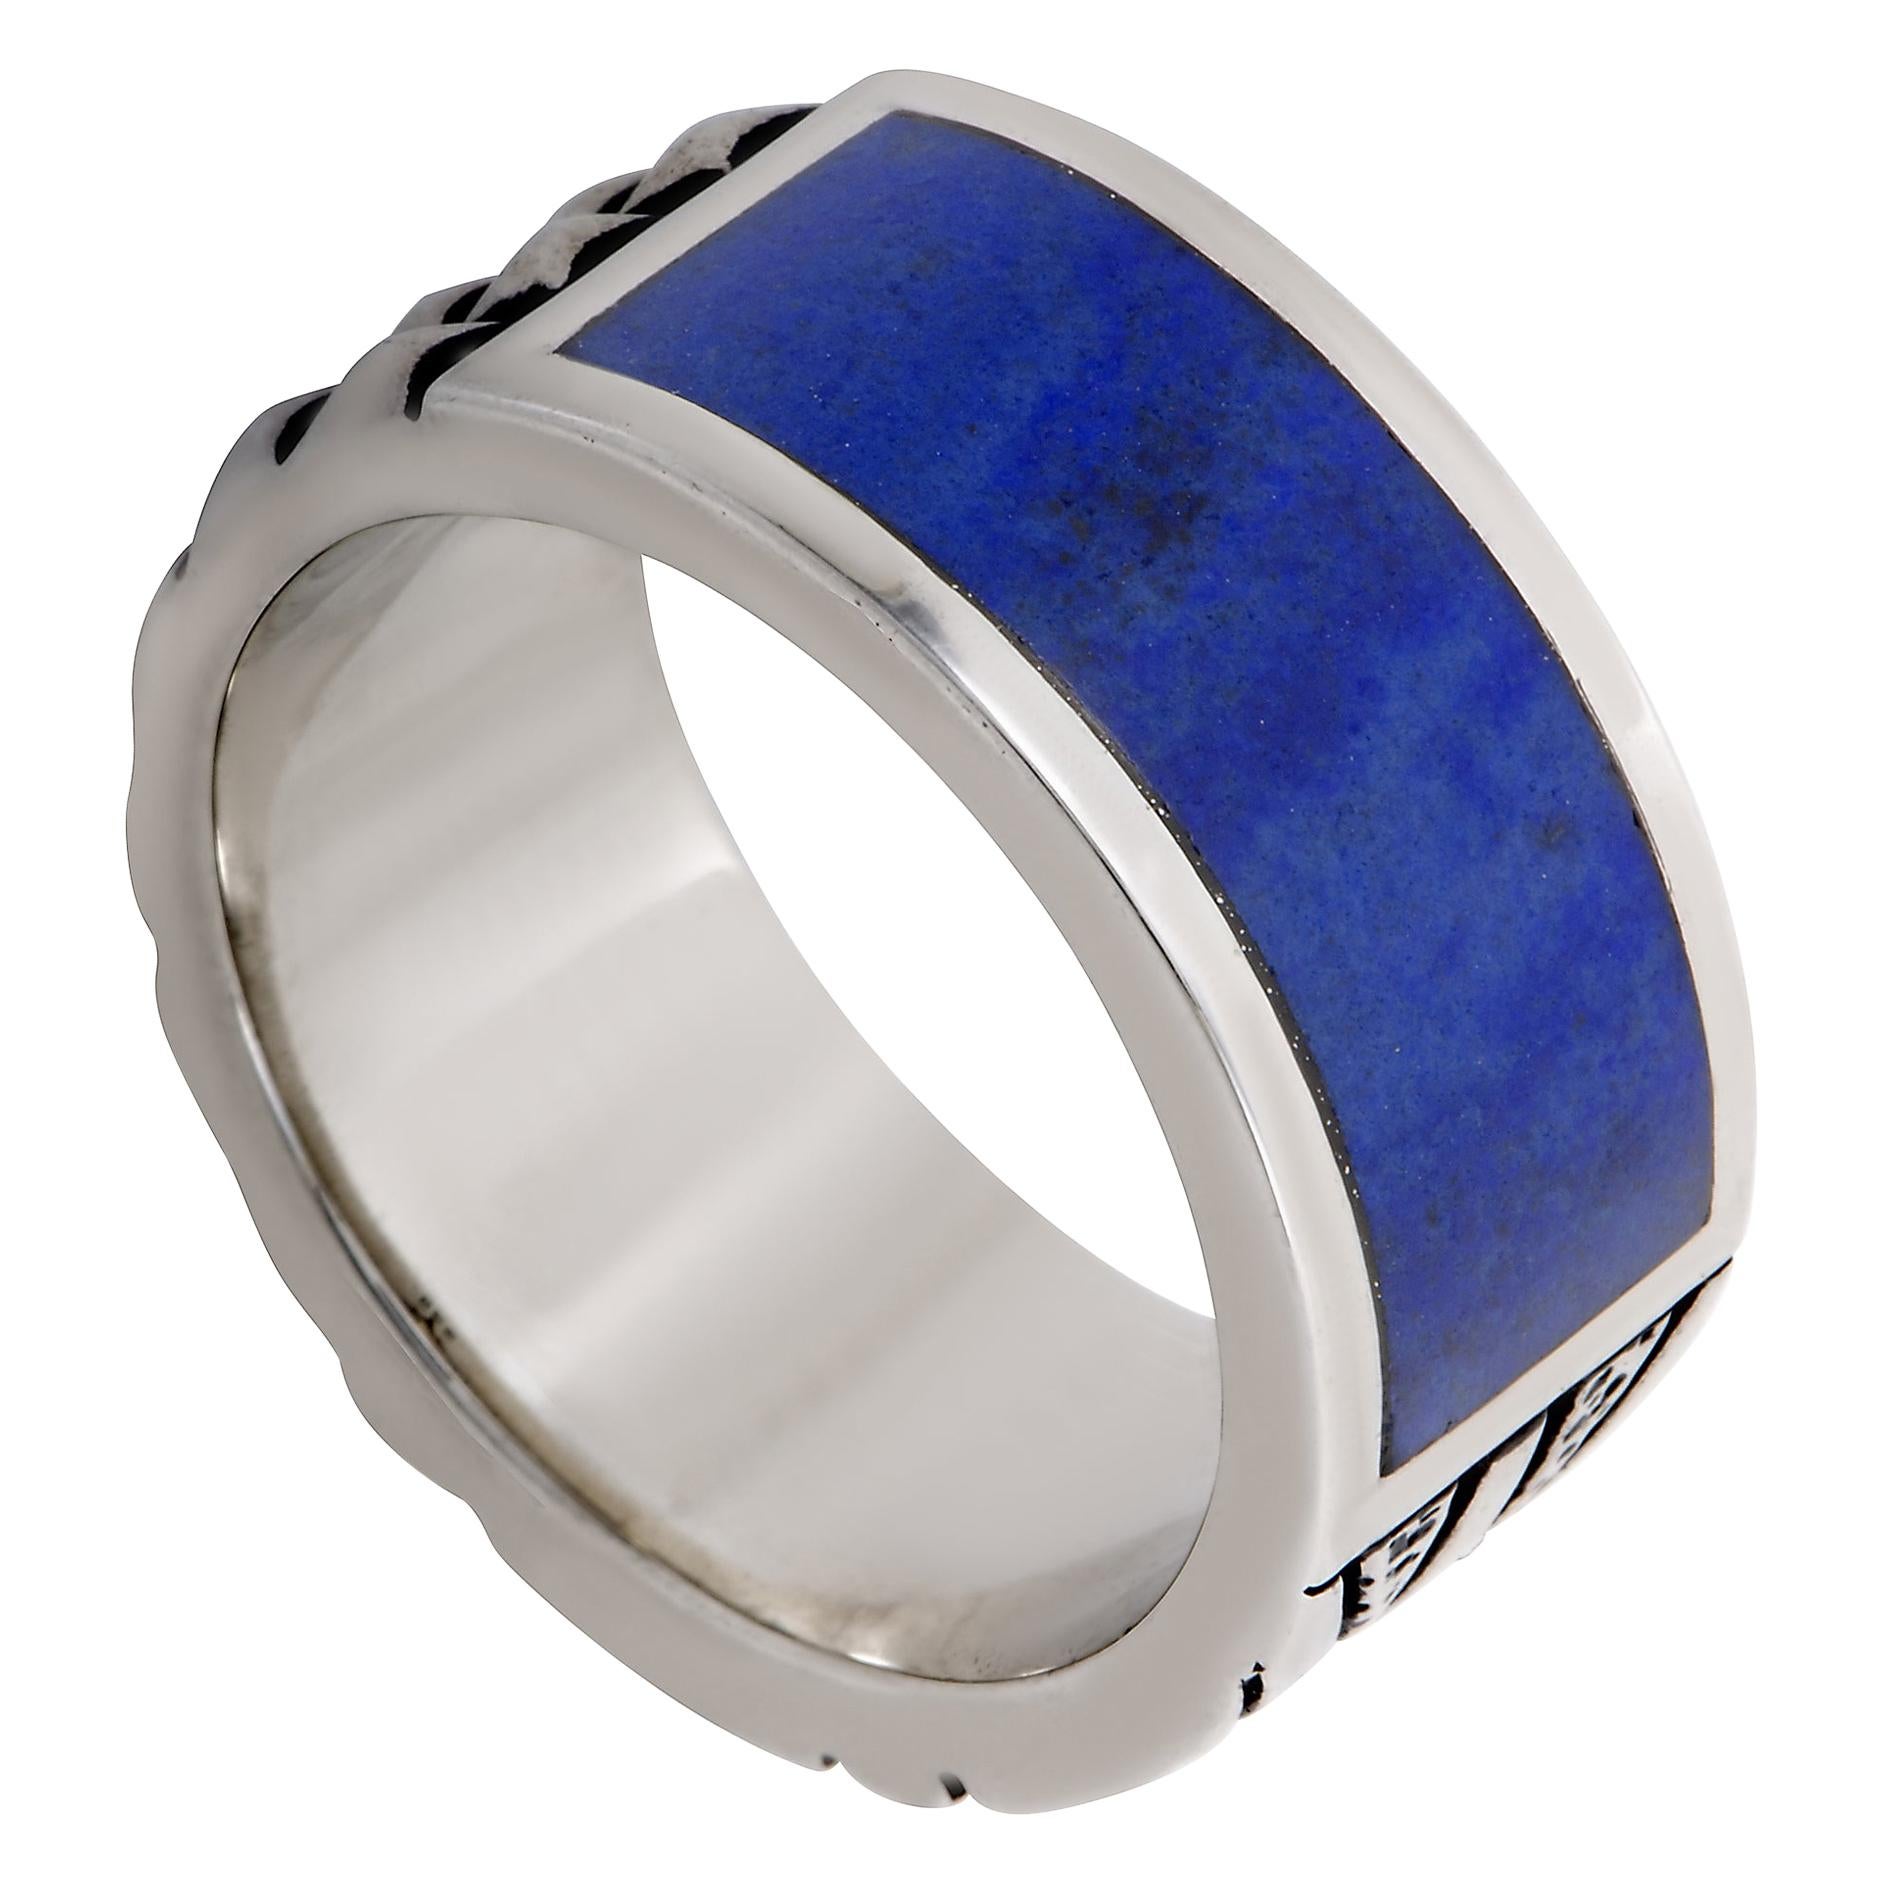 Stephen Webster Alchemy in the UK Silver and Lapis Union Jack Band Ring